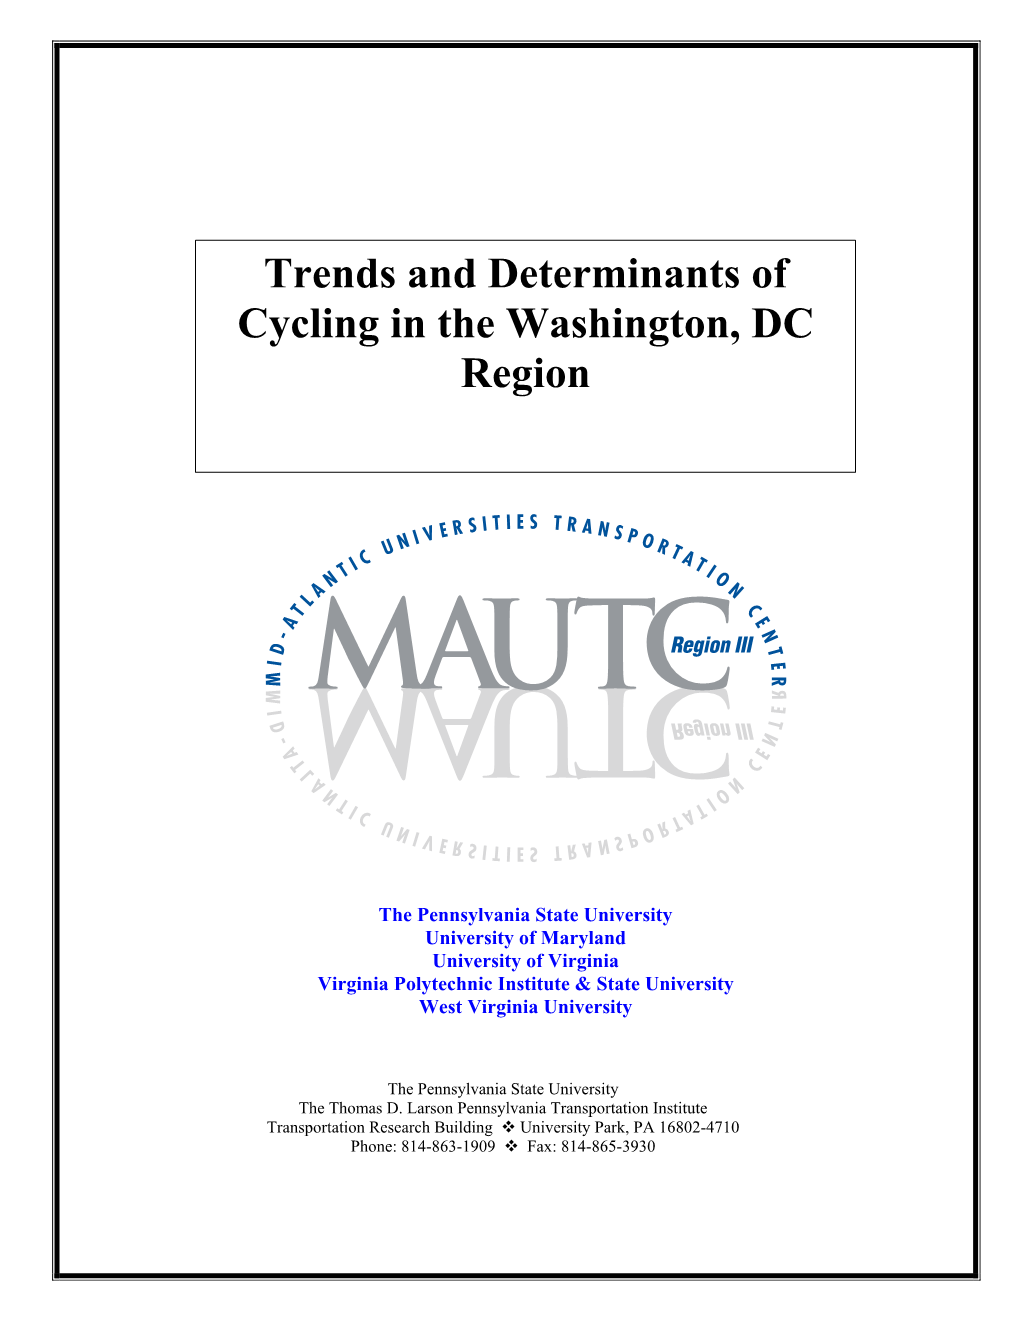 Trends and Determinants of Cycling in the Washington, DC Region 6